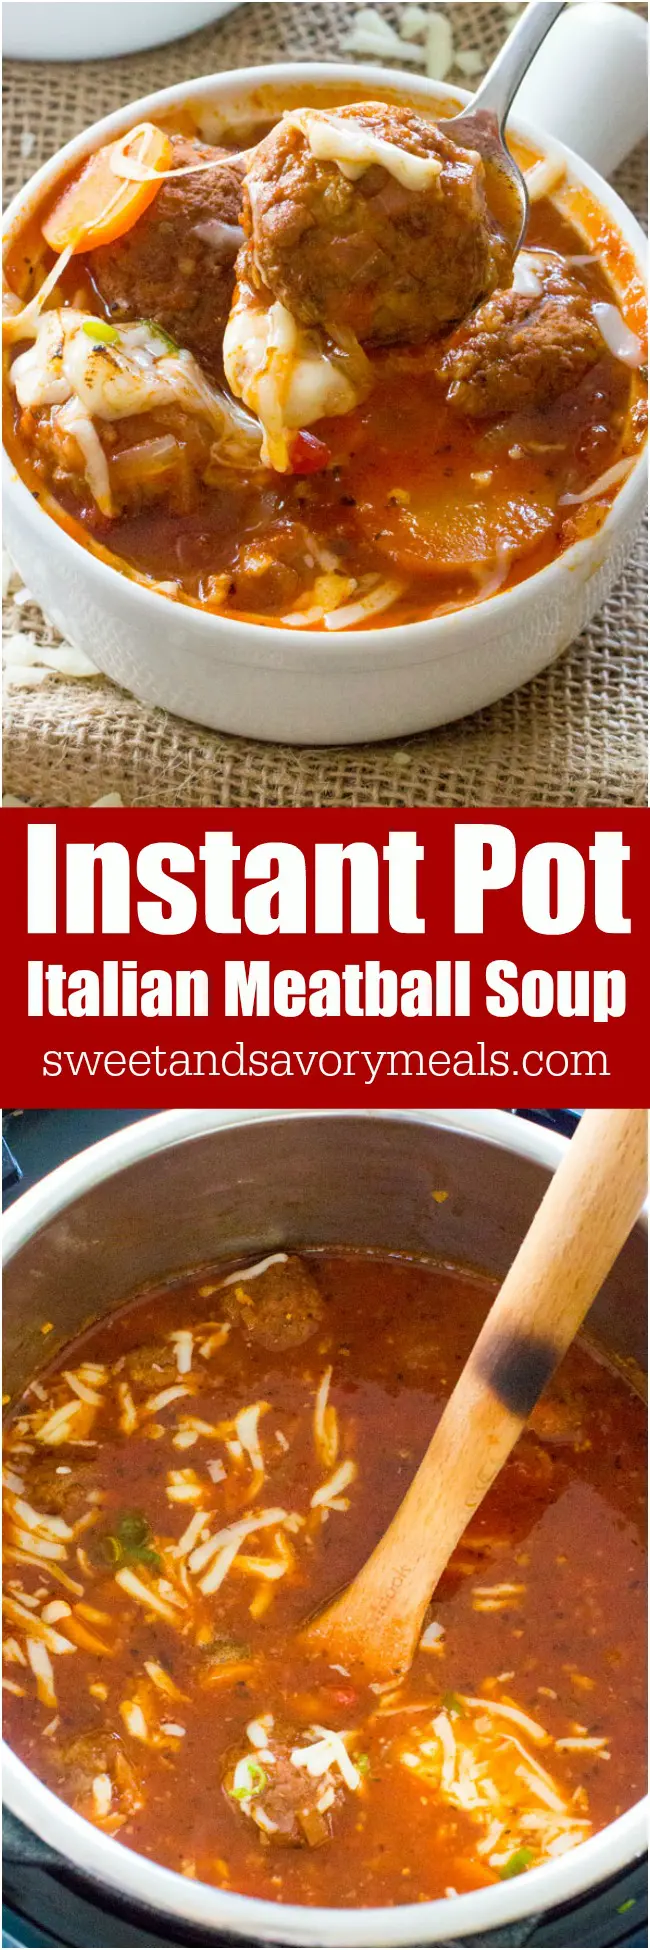 Instant Pot Italian Meatball Soup is a great family meal, easily made in your Instant Pot, with budget friendly ingredients and in just 30 minutes.